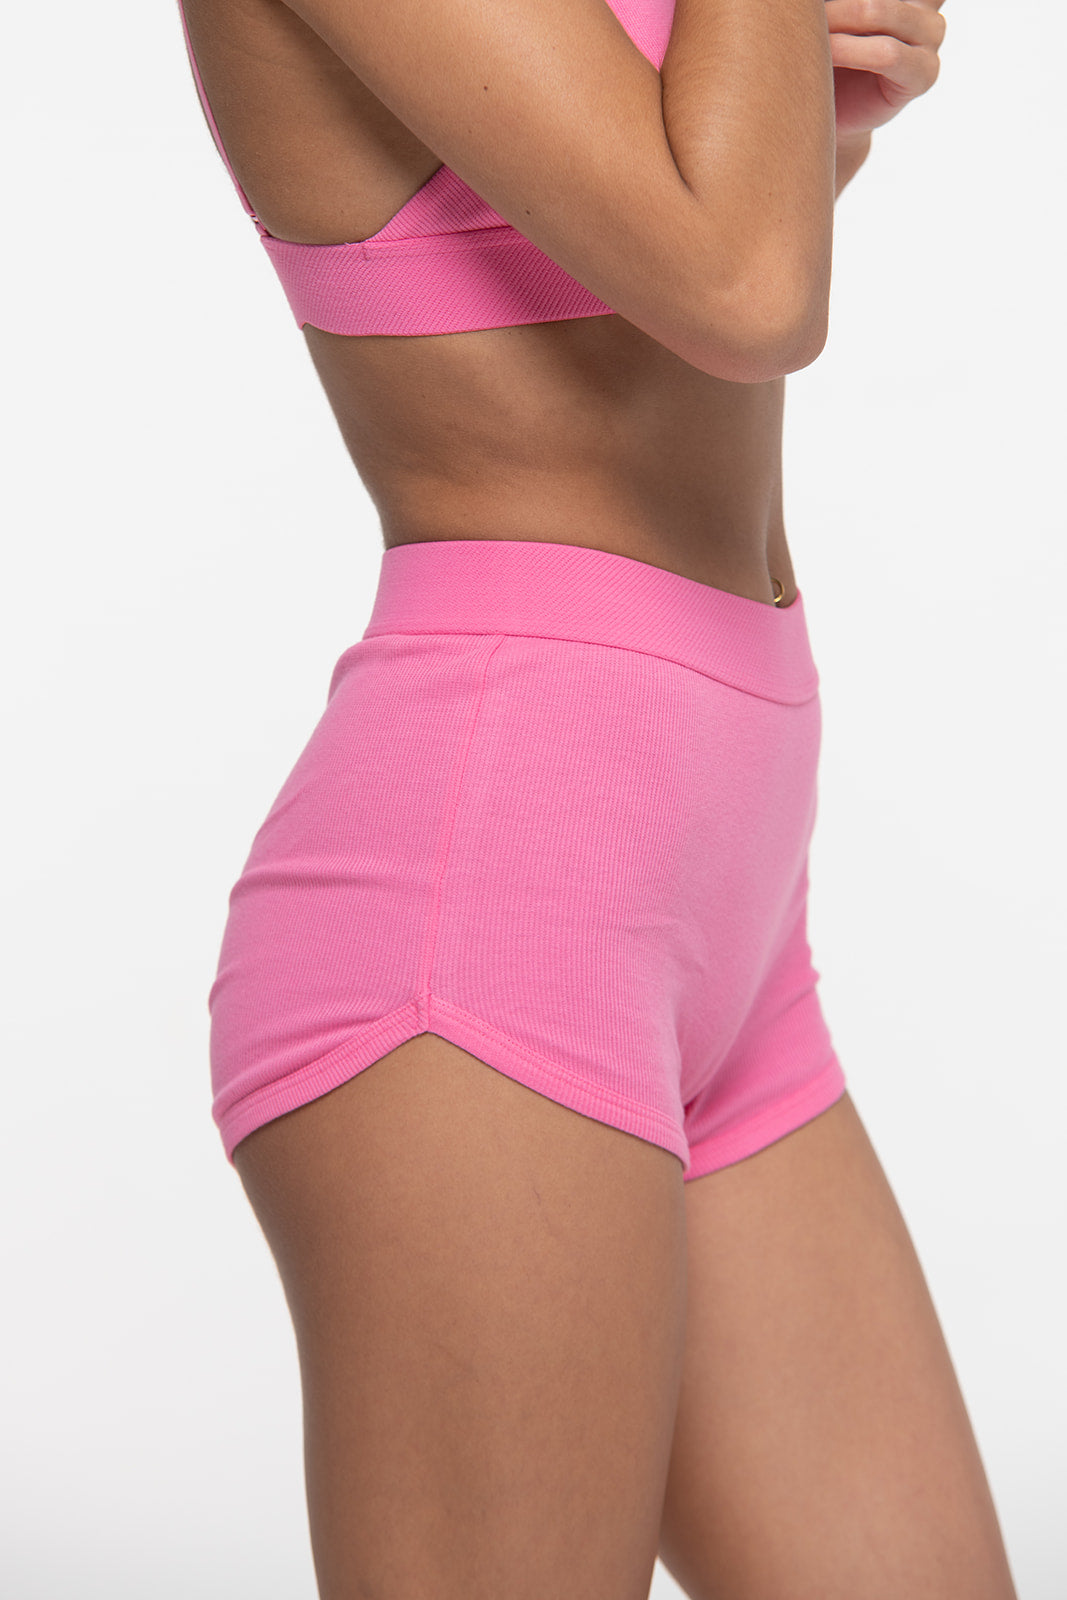 Miami Cheeky Brief Pretty In Pink 4 Set - Buy 3 get 1 free!